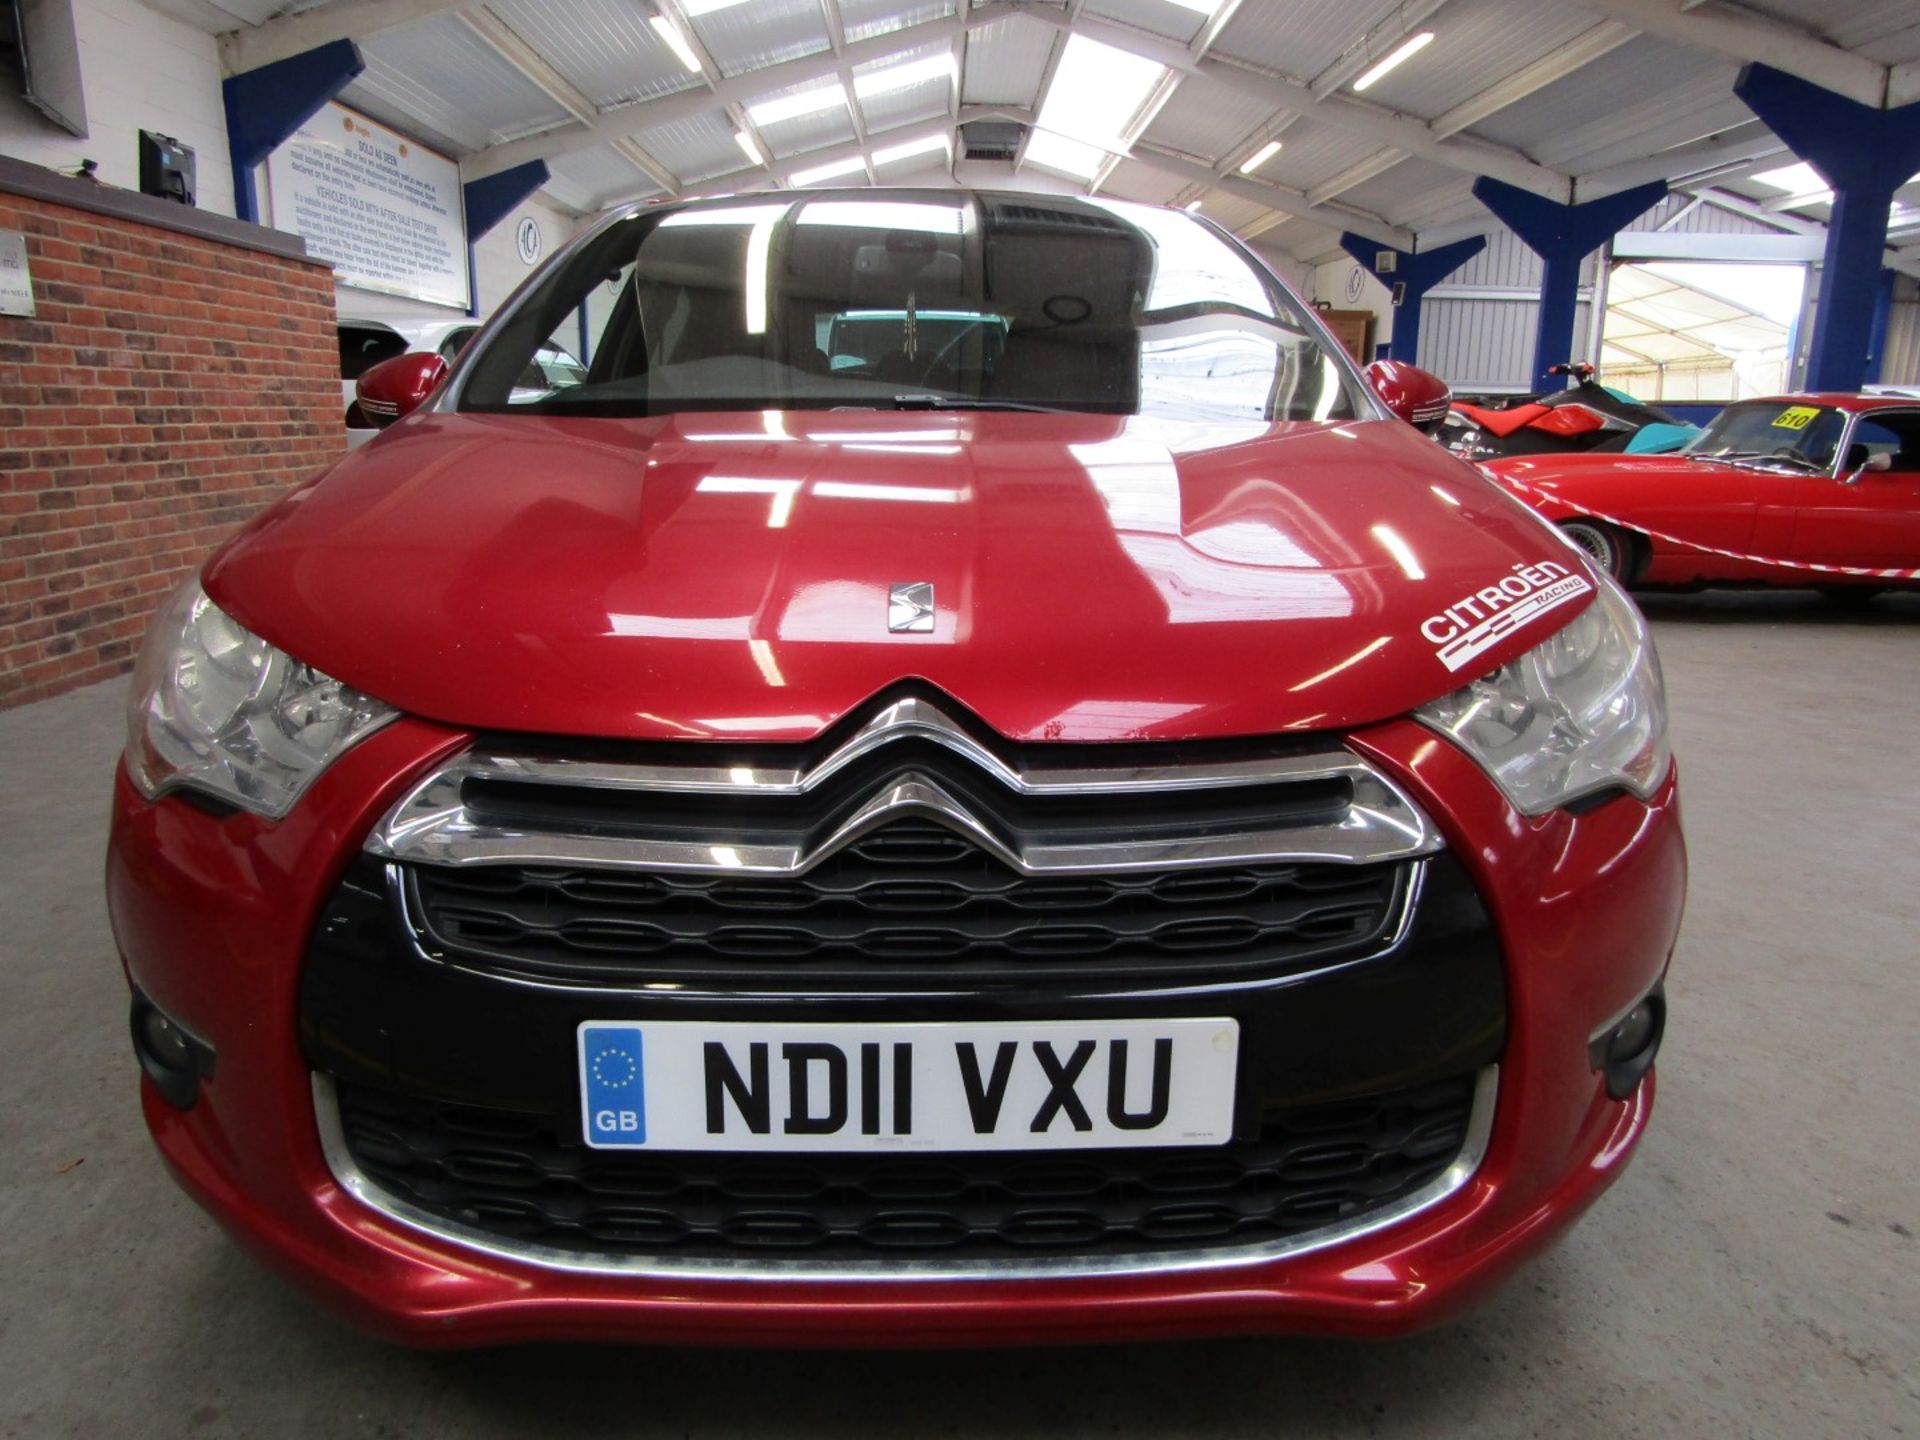 11 11 Citroen DS4 DStyle HDI - Image 2 of 25